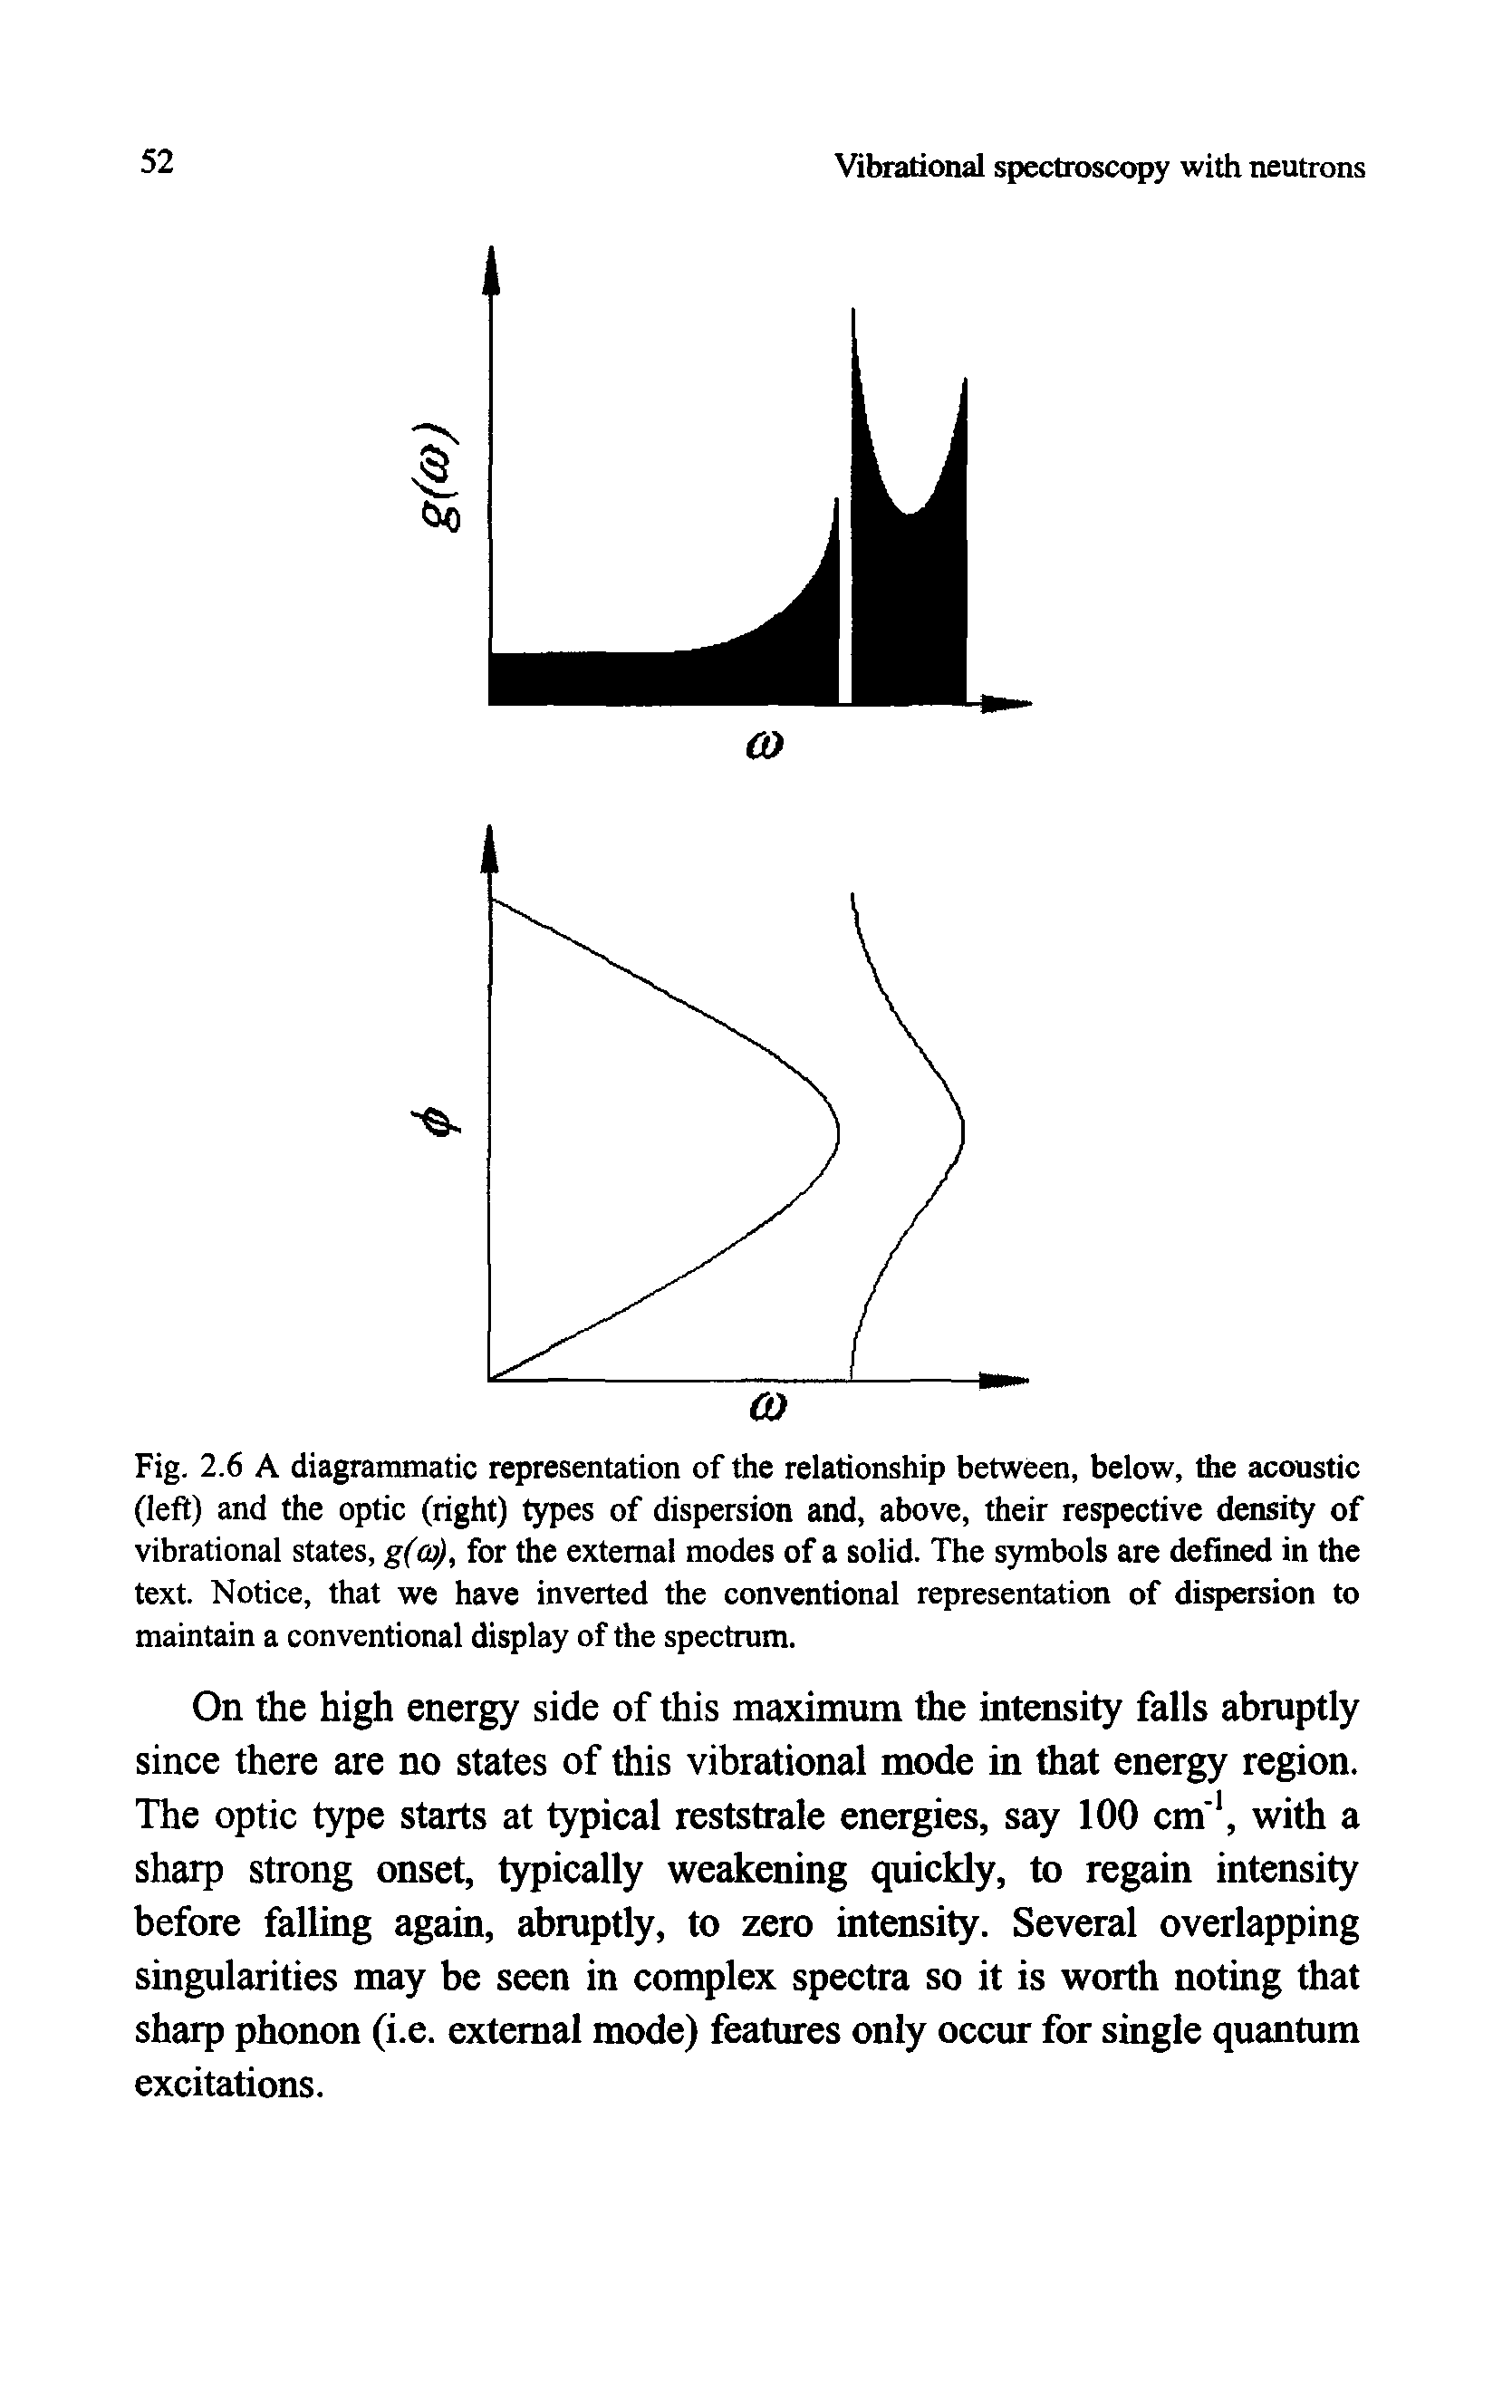 Fig. 2.6 A diagrammatic representation of the relationship between, below, the acoustic (left) and the optic (right) types of dispersion and, above, their respective density of vibrational states, g(0), for the external modes of a solid. The symbols are defined in the text. Notice, that we have inverted the conventional representation of dispersion to maintain a conventional display of the spectrum.